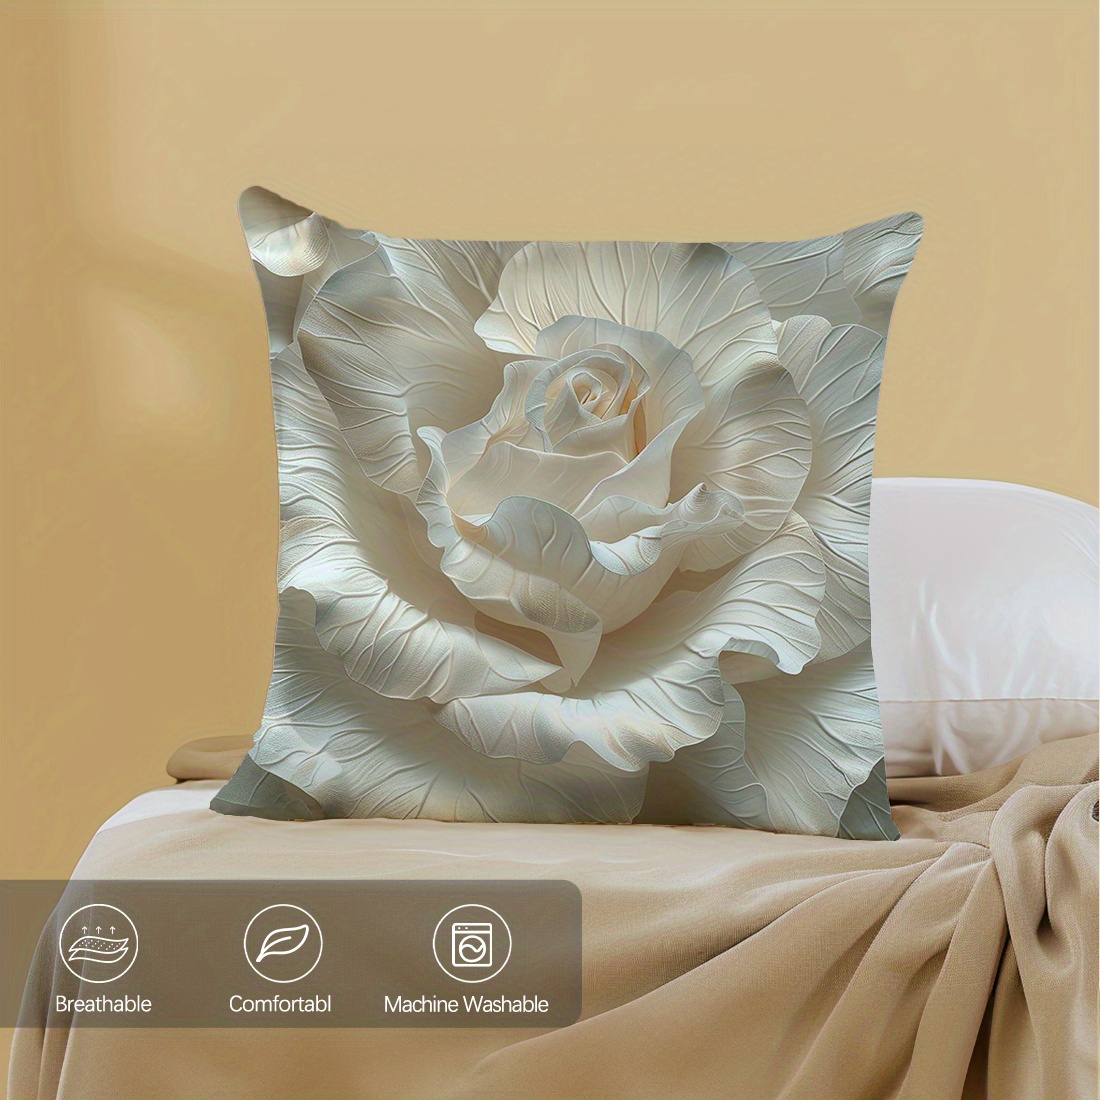 

1pc, 3d Floral Embossed Single-sided Printed Throw Pillow Cover, Contemporary Style, Peach Skin Velvet Cushion Case 45x45cm (17.7x17.7inches), Sofa Decorative, Breathable & Machine Washable